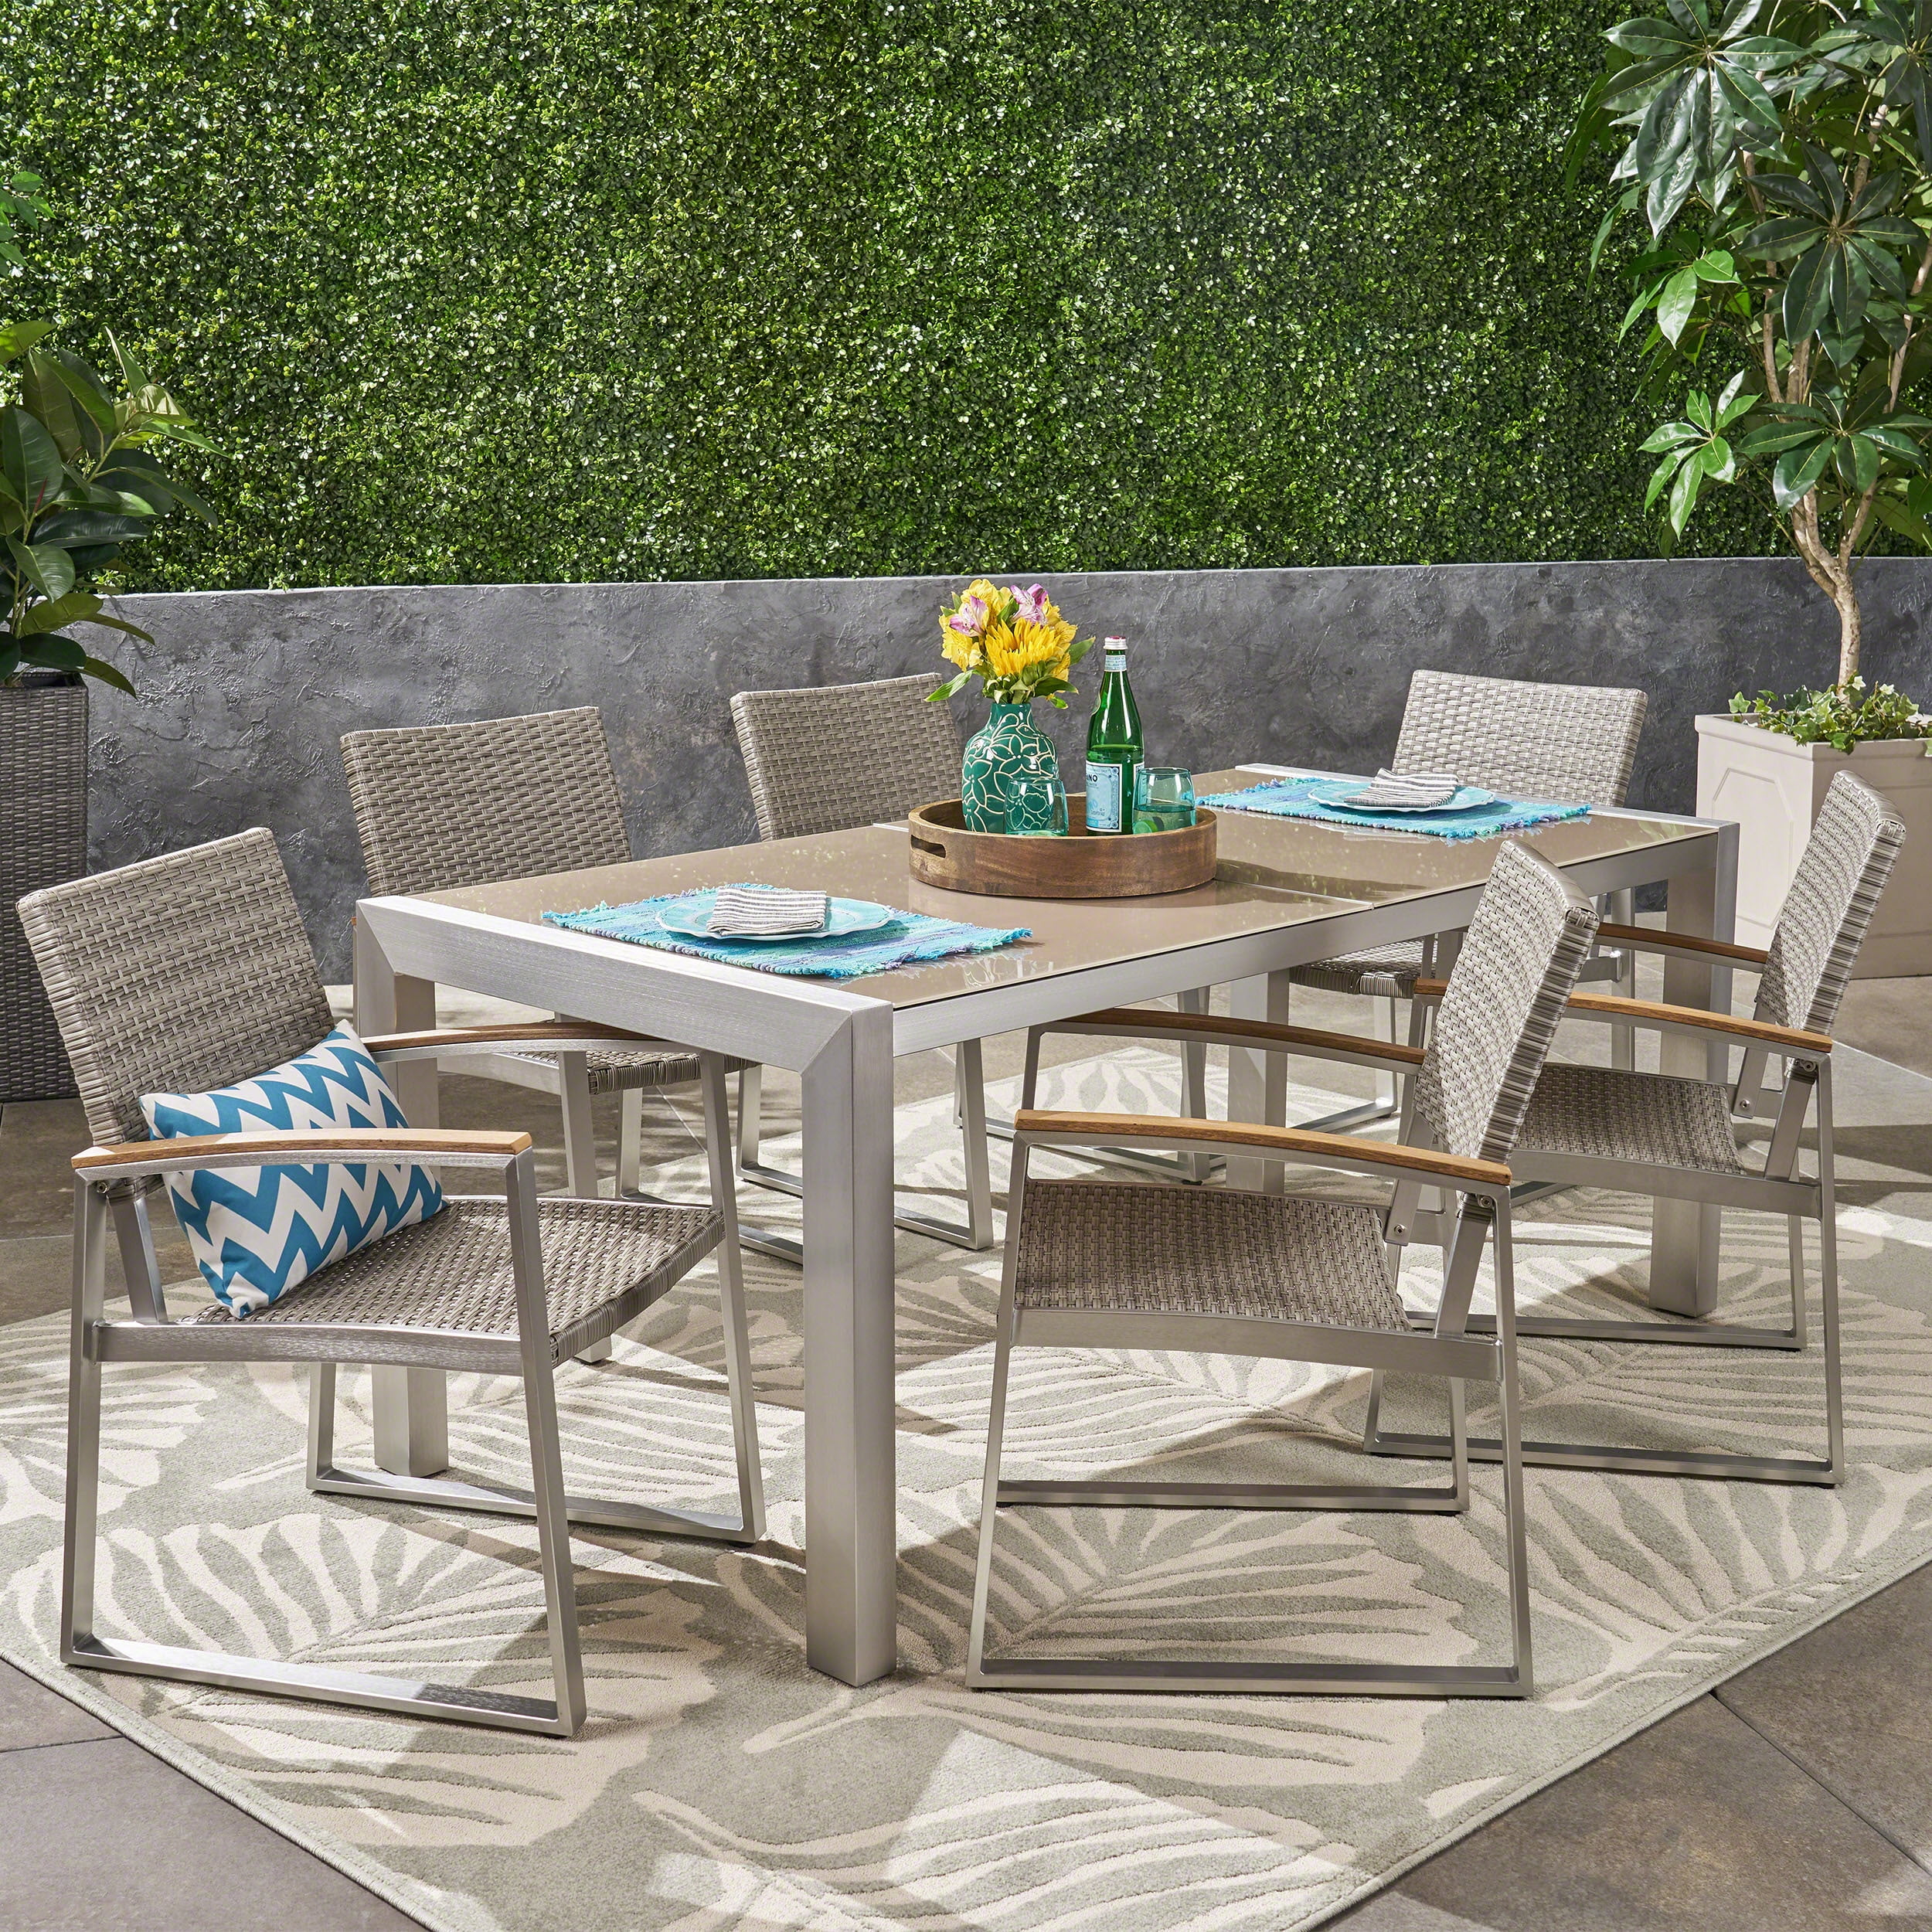 Wicker Outdoor Dining Table With Glass Top - Aiden Outdoor Wicker Side ...